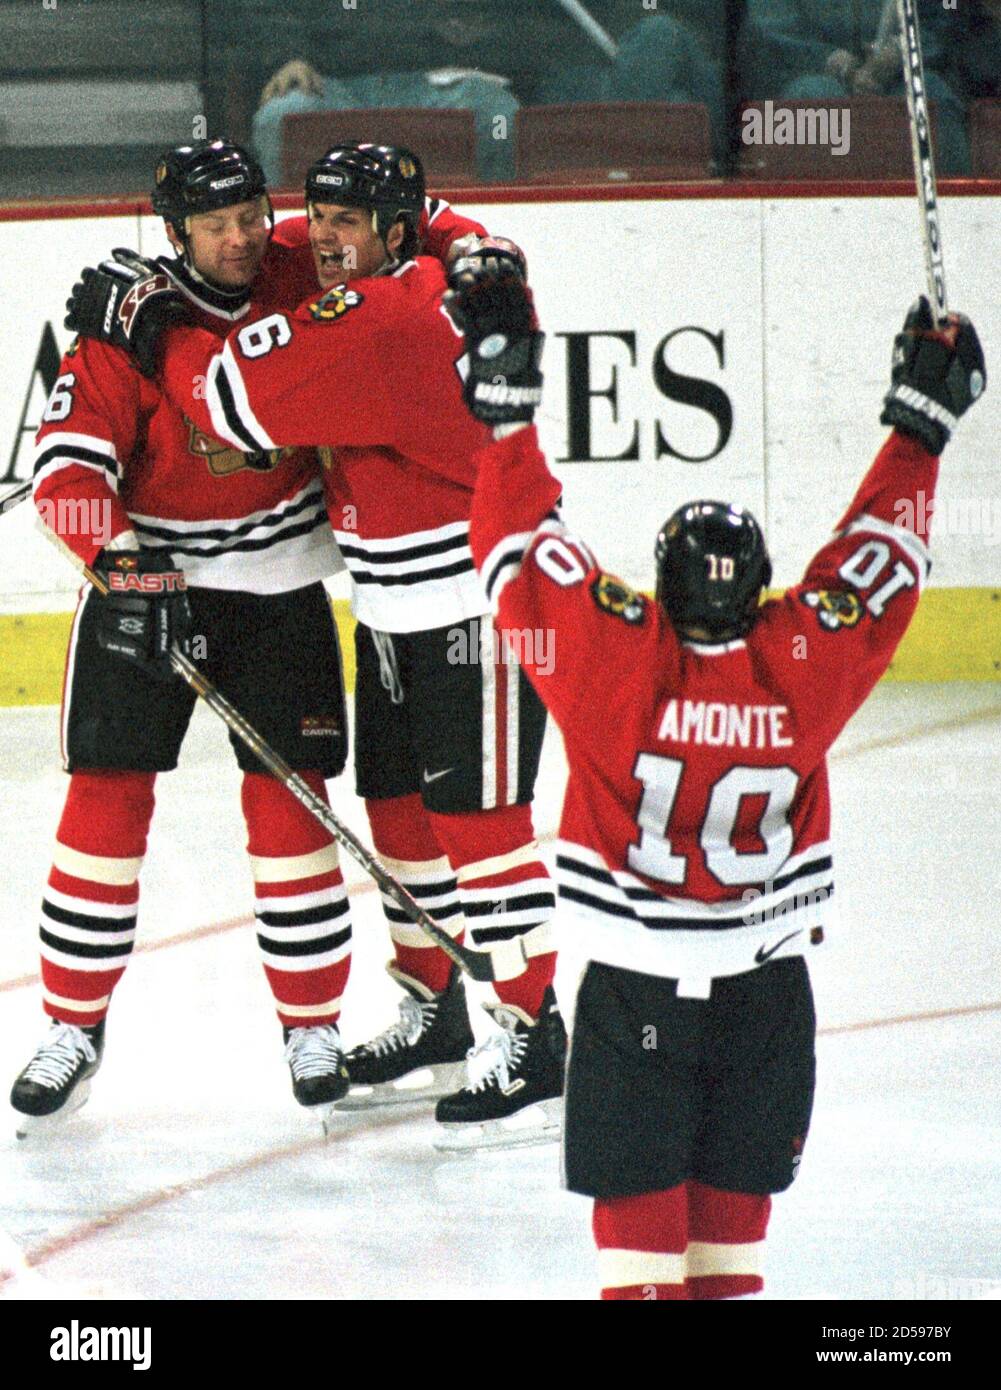 Chicago Blackhawks center Alexei Zhamnov (L) embraces Ed Olczyk as their  teammate Tony Amonte (10) raises his arms as they celebrate Olczyk's first  period goal against the Colorado Avalanche in Denver, March